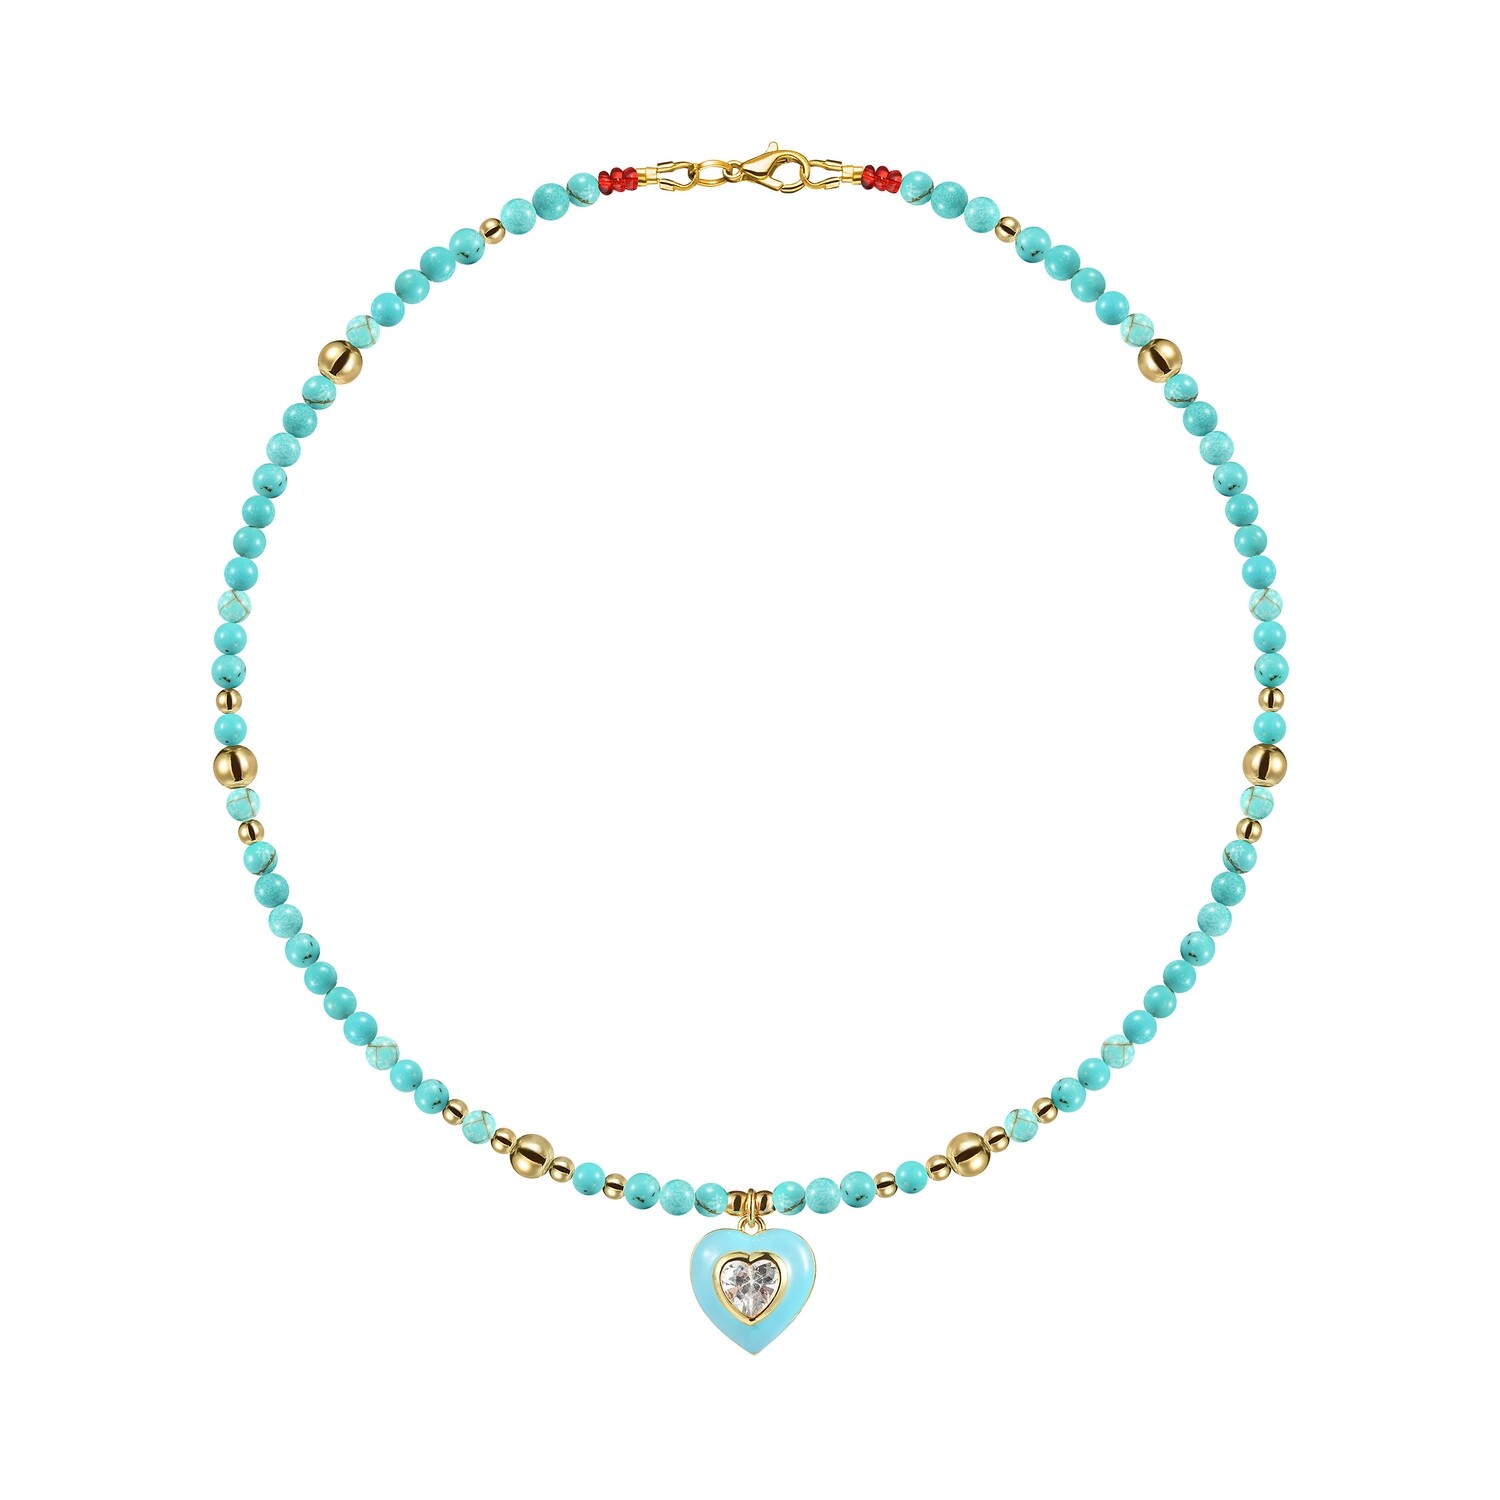 Turquoise Necklace with Heart Pendant